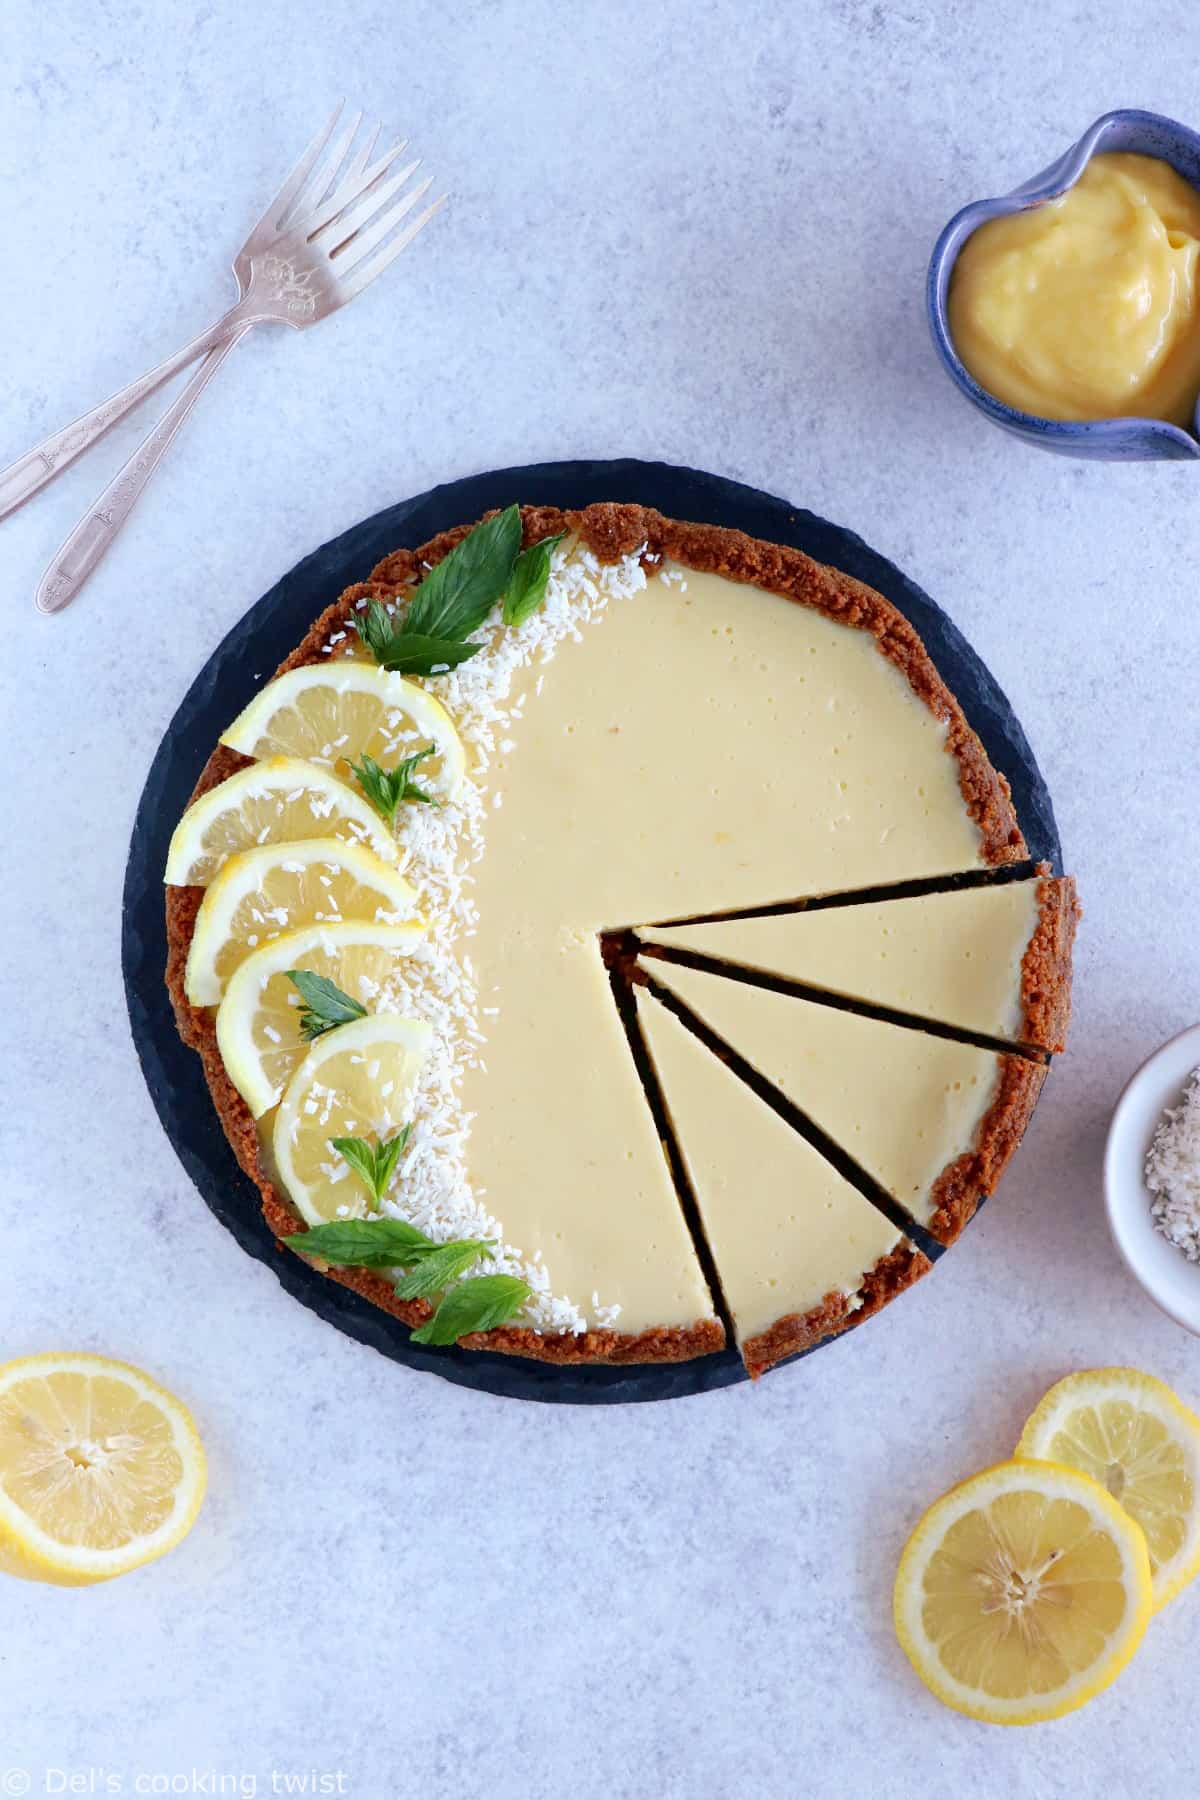 The Fabulous Speculoos Lemon Tart. 5 ingredients only for this super simple speculoos lemon tart. My favorite recipe for busy days. Expect creamy, refreshing flavors with a sweet crunchy base.